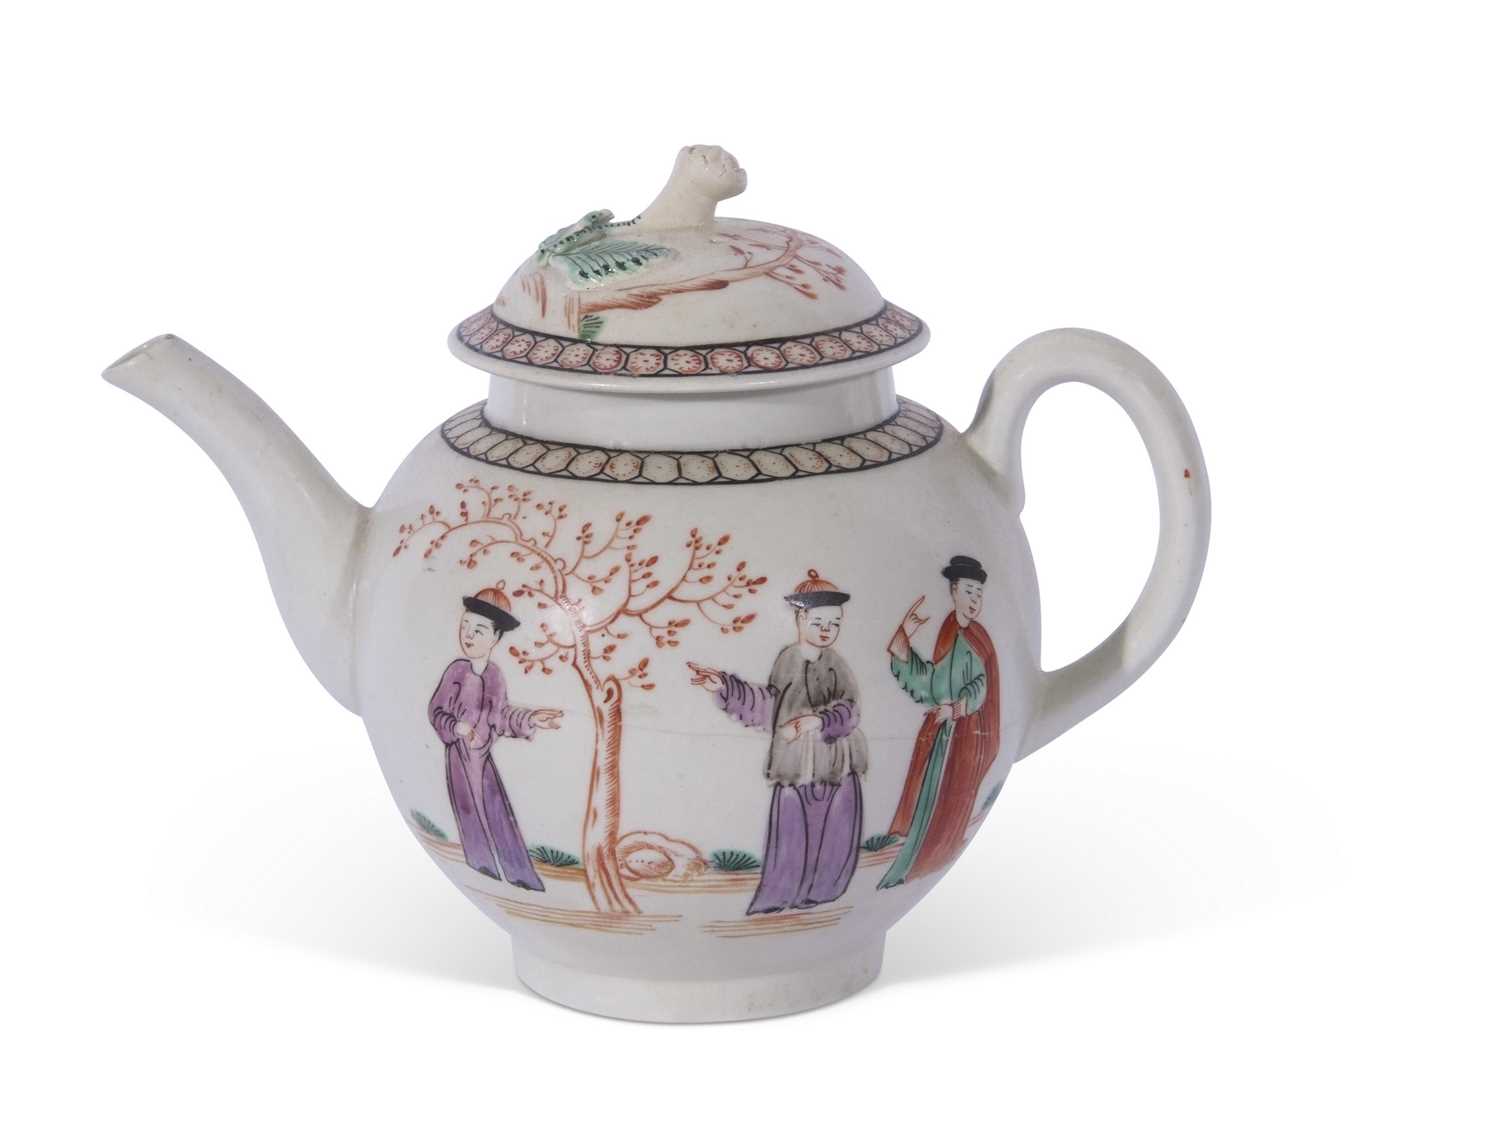 Lowestoft porcelain tea pot, circa 1780, with a polychrome design of Chinese figures by a tree,